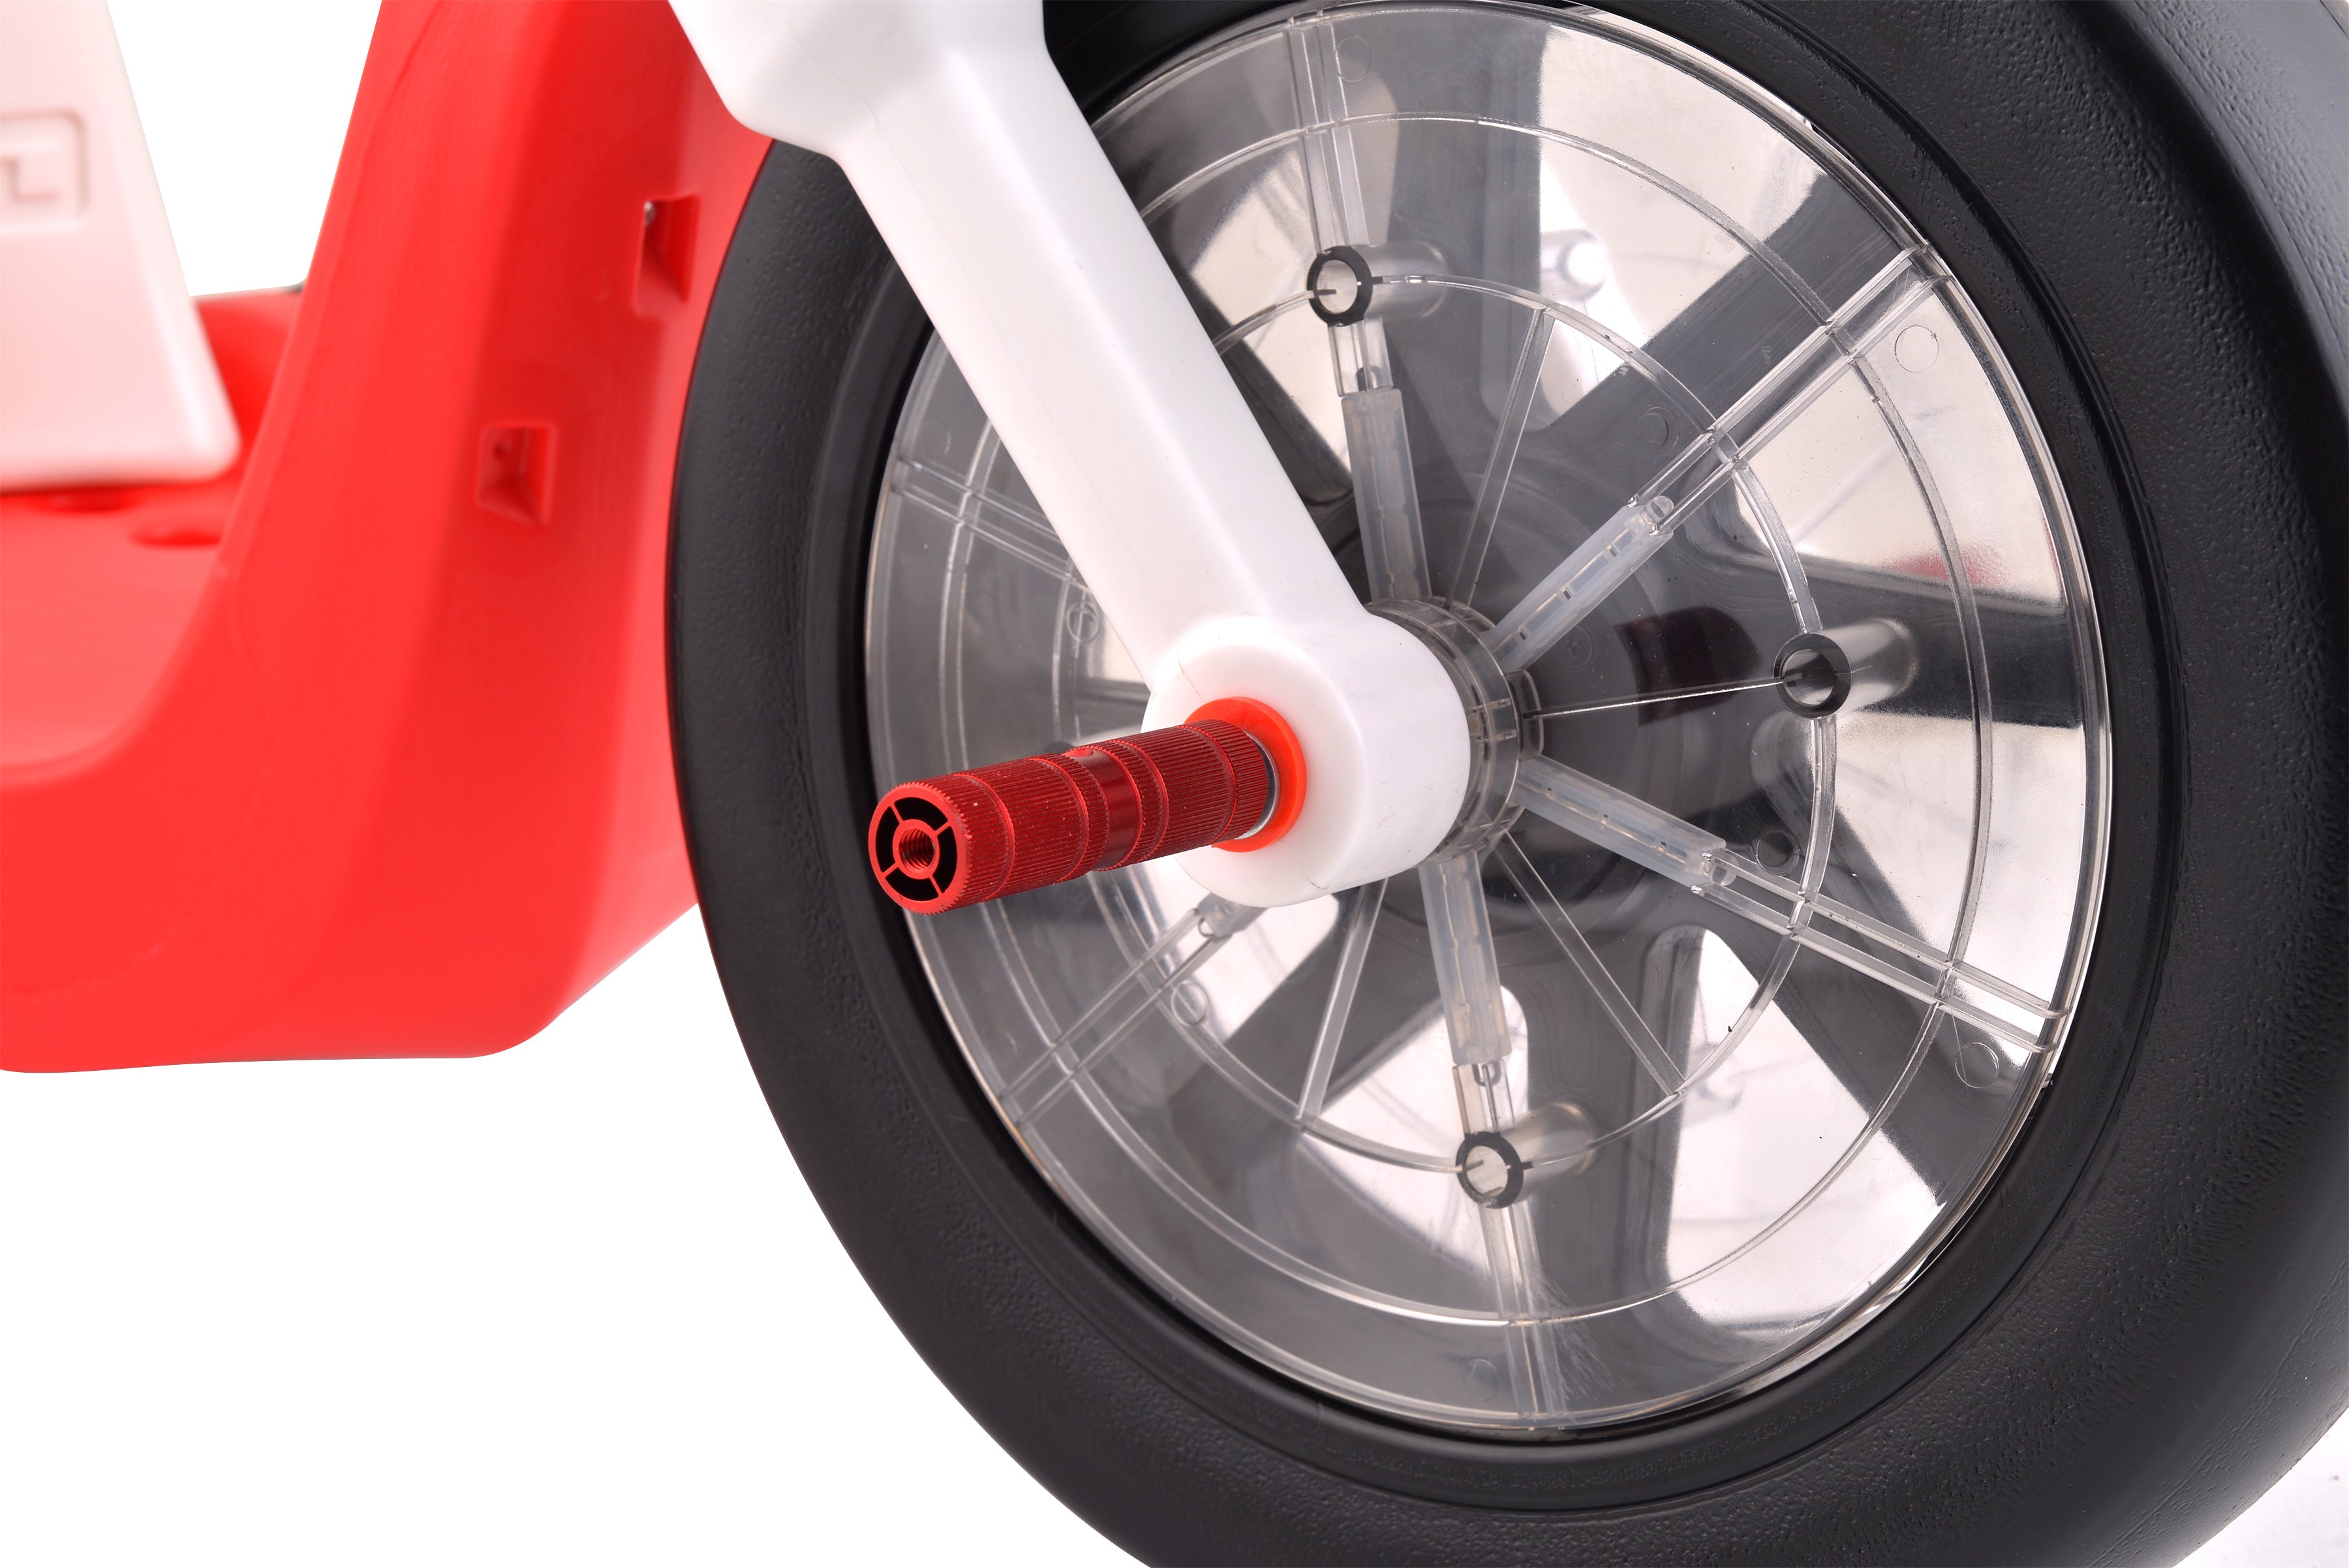 Romper product focusing on front big wheel